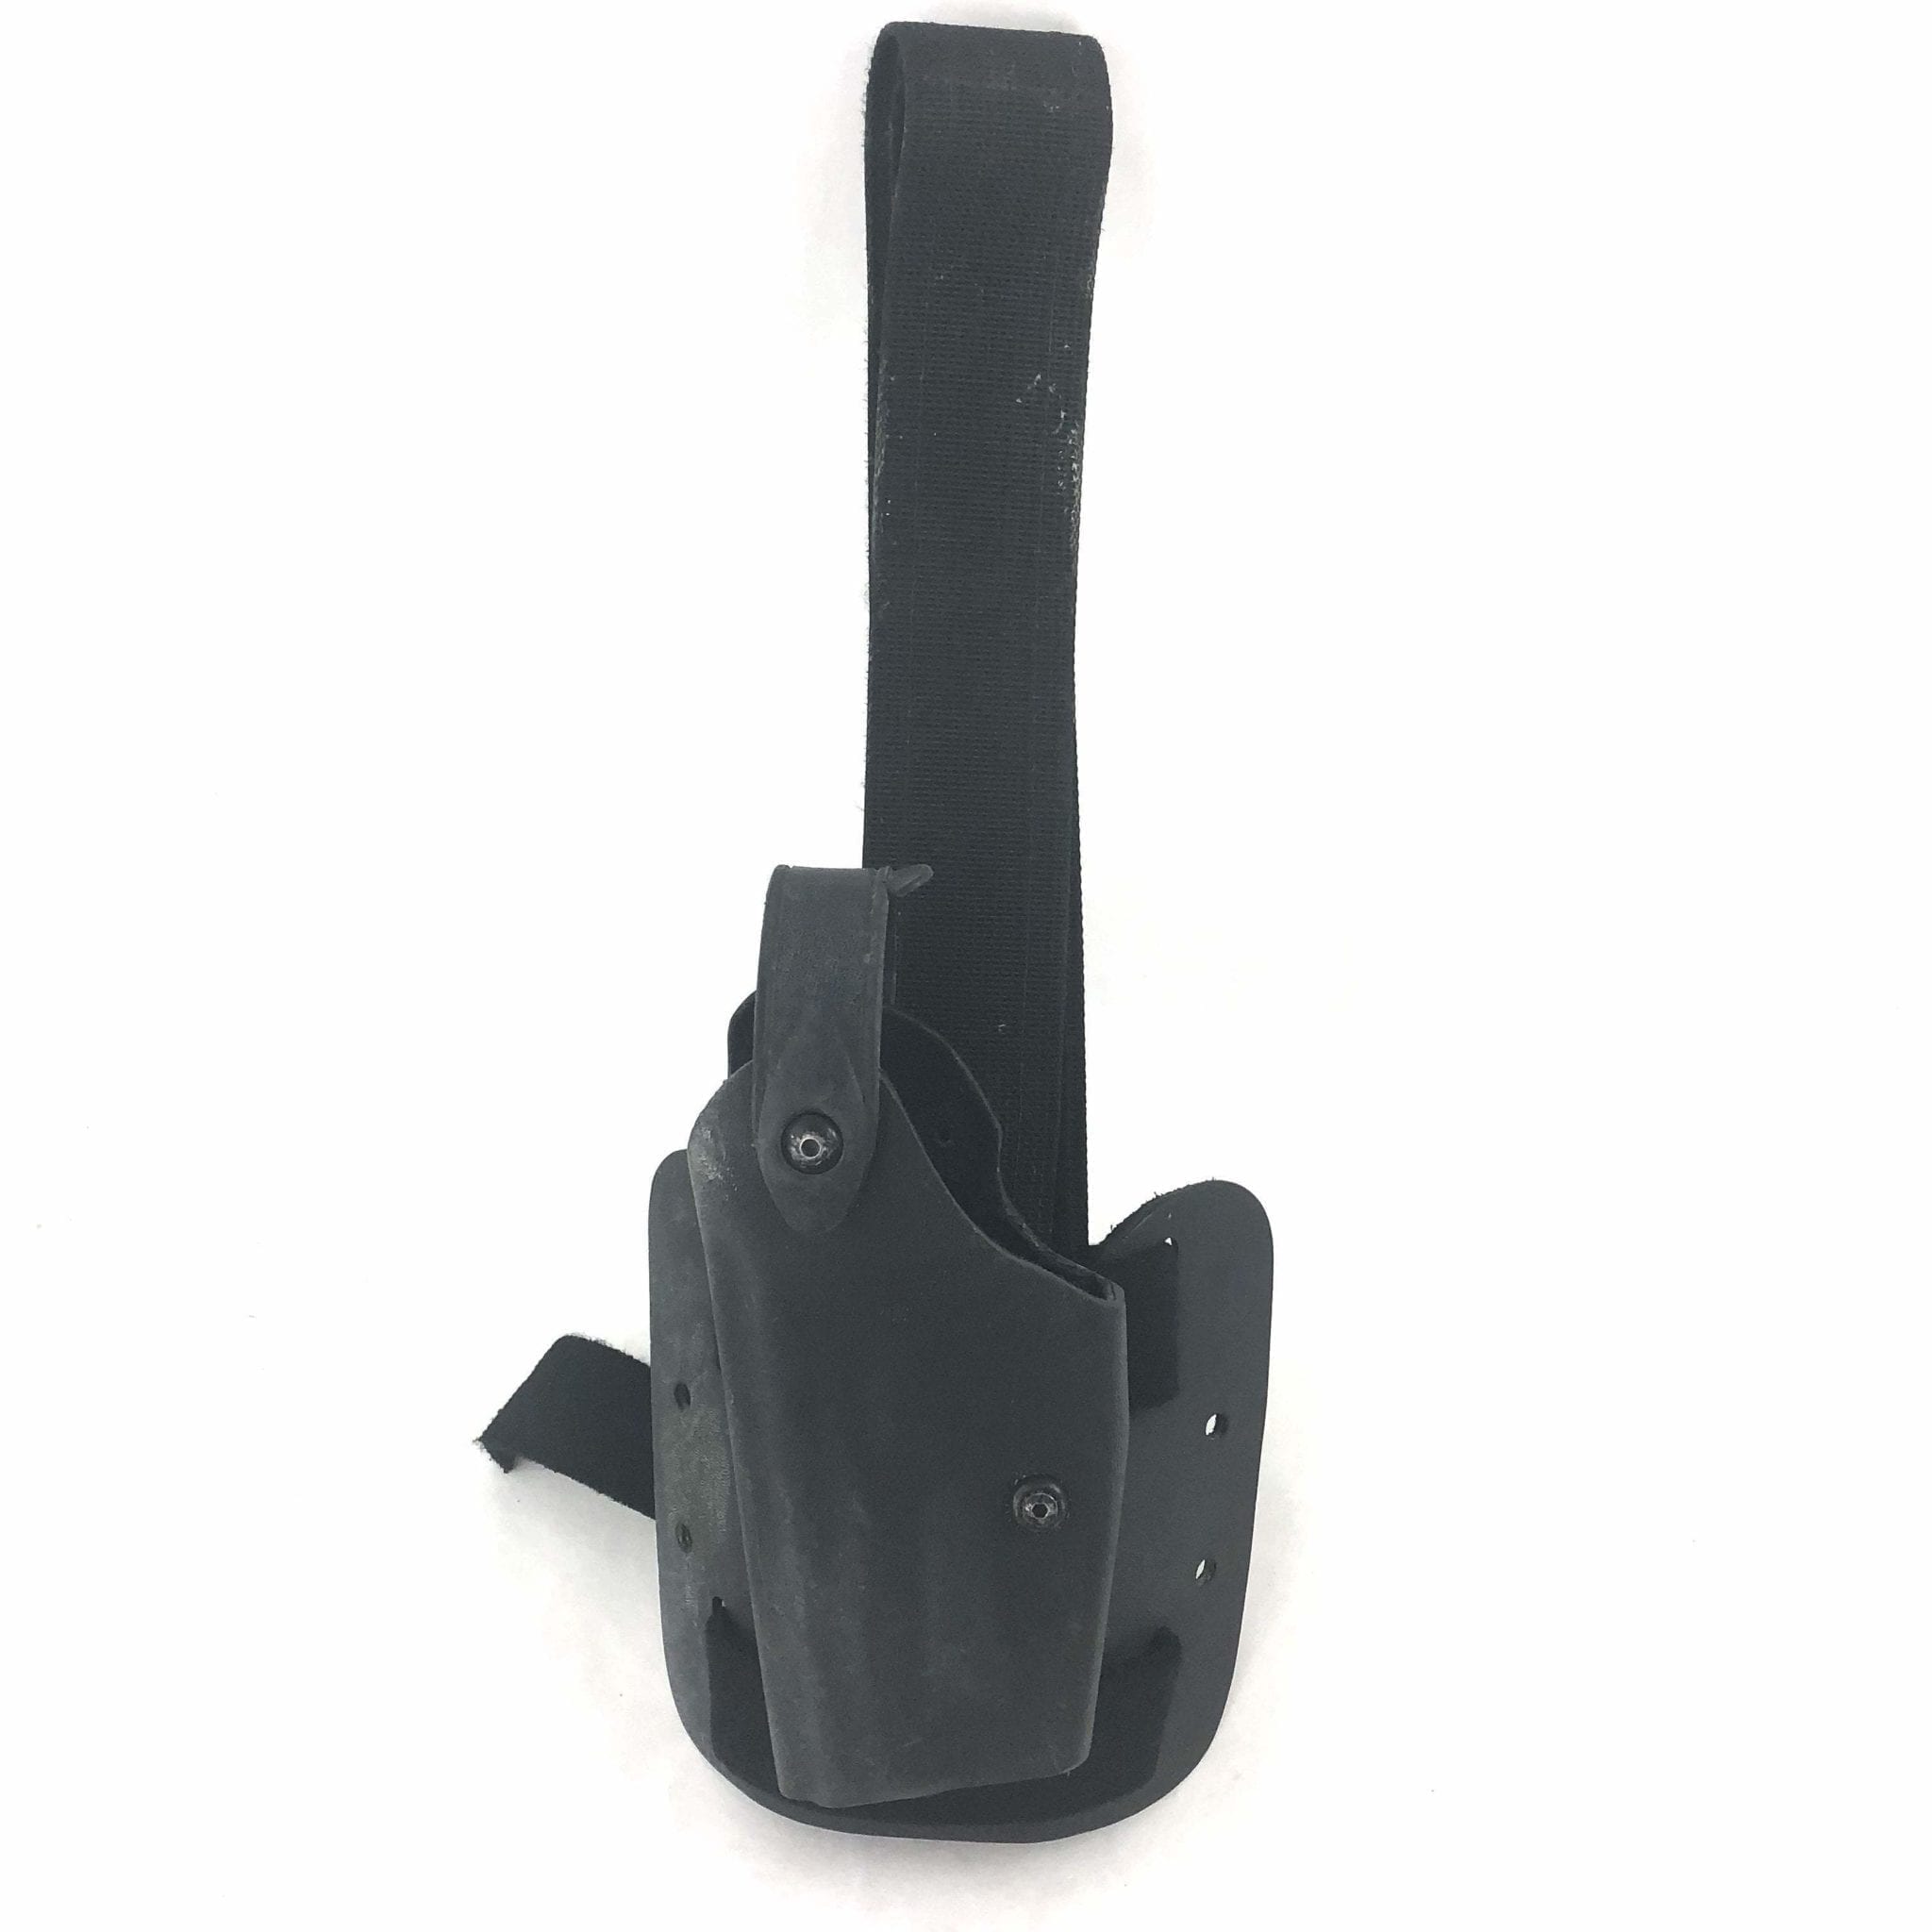 Used Safariland SLS Holster Model 6004-77, For SIG 226 and 220